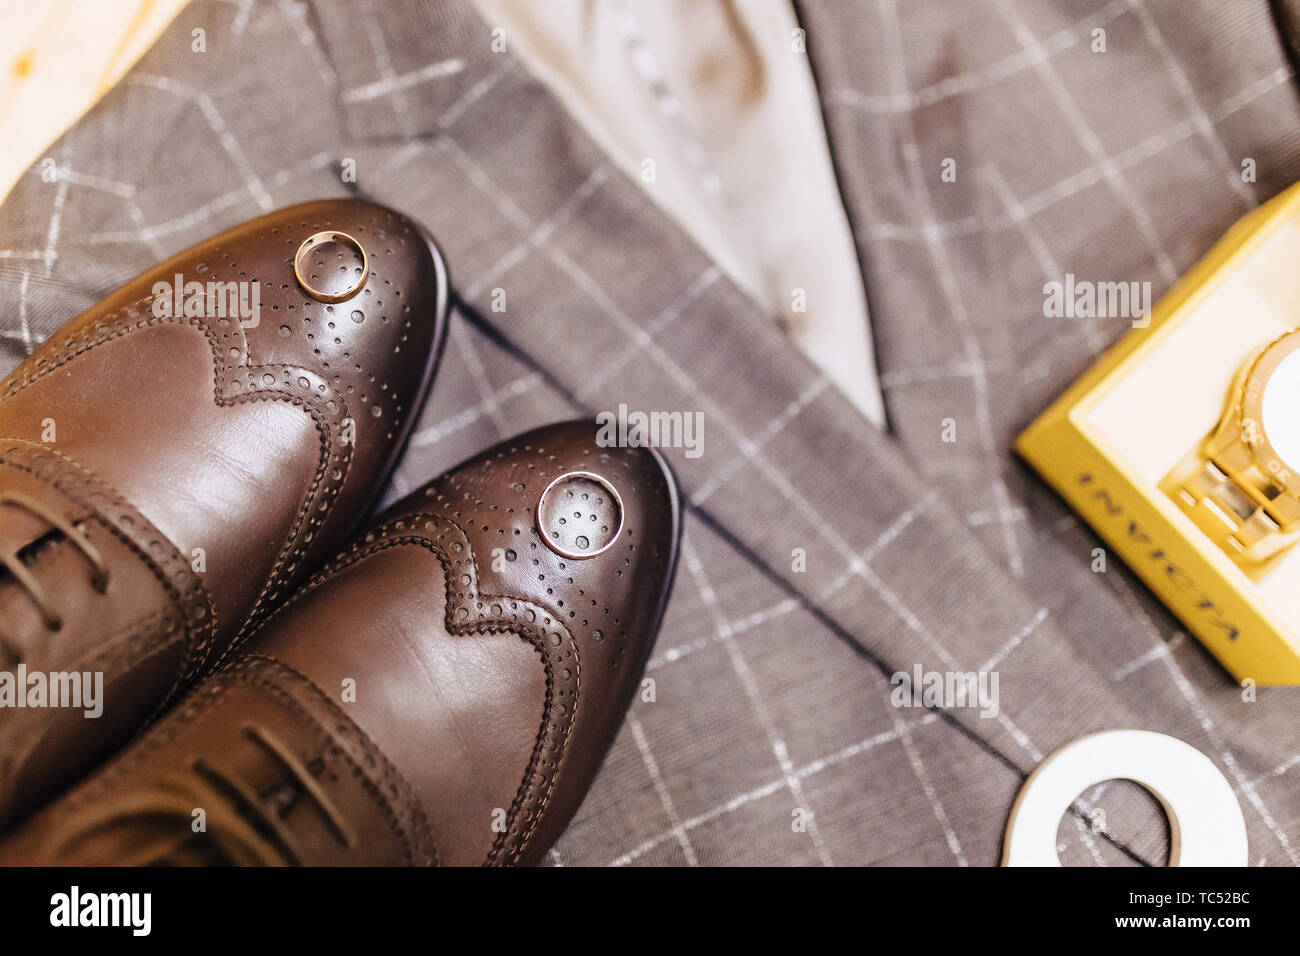 Premium Photo  Men fashion brown shoes leather on the floor.